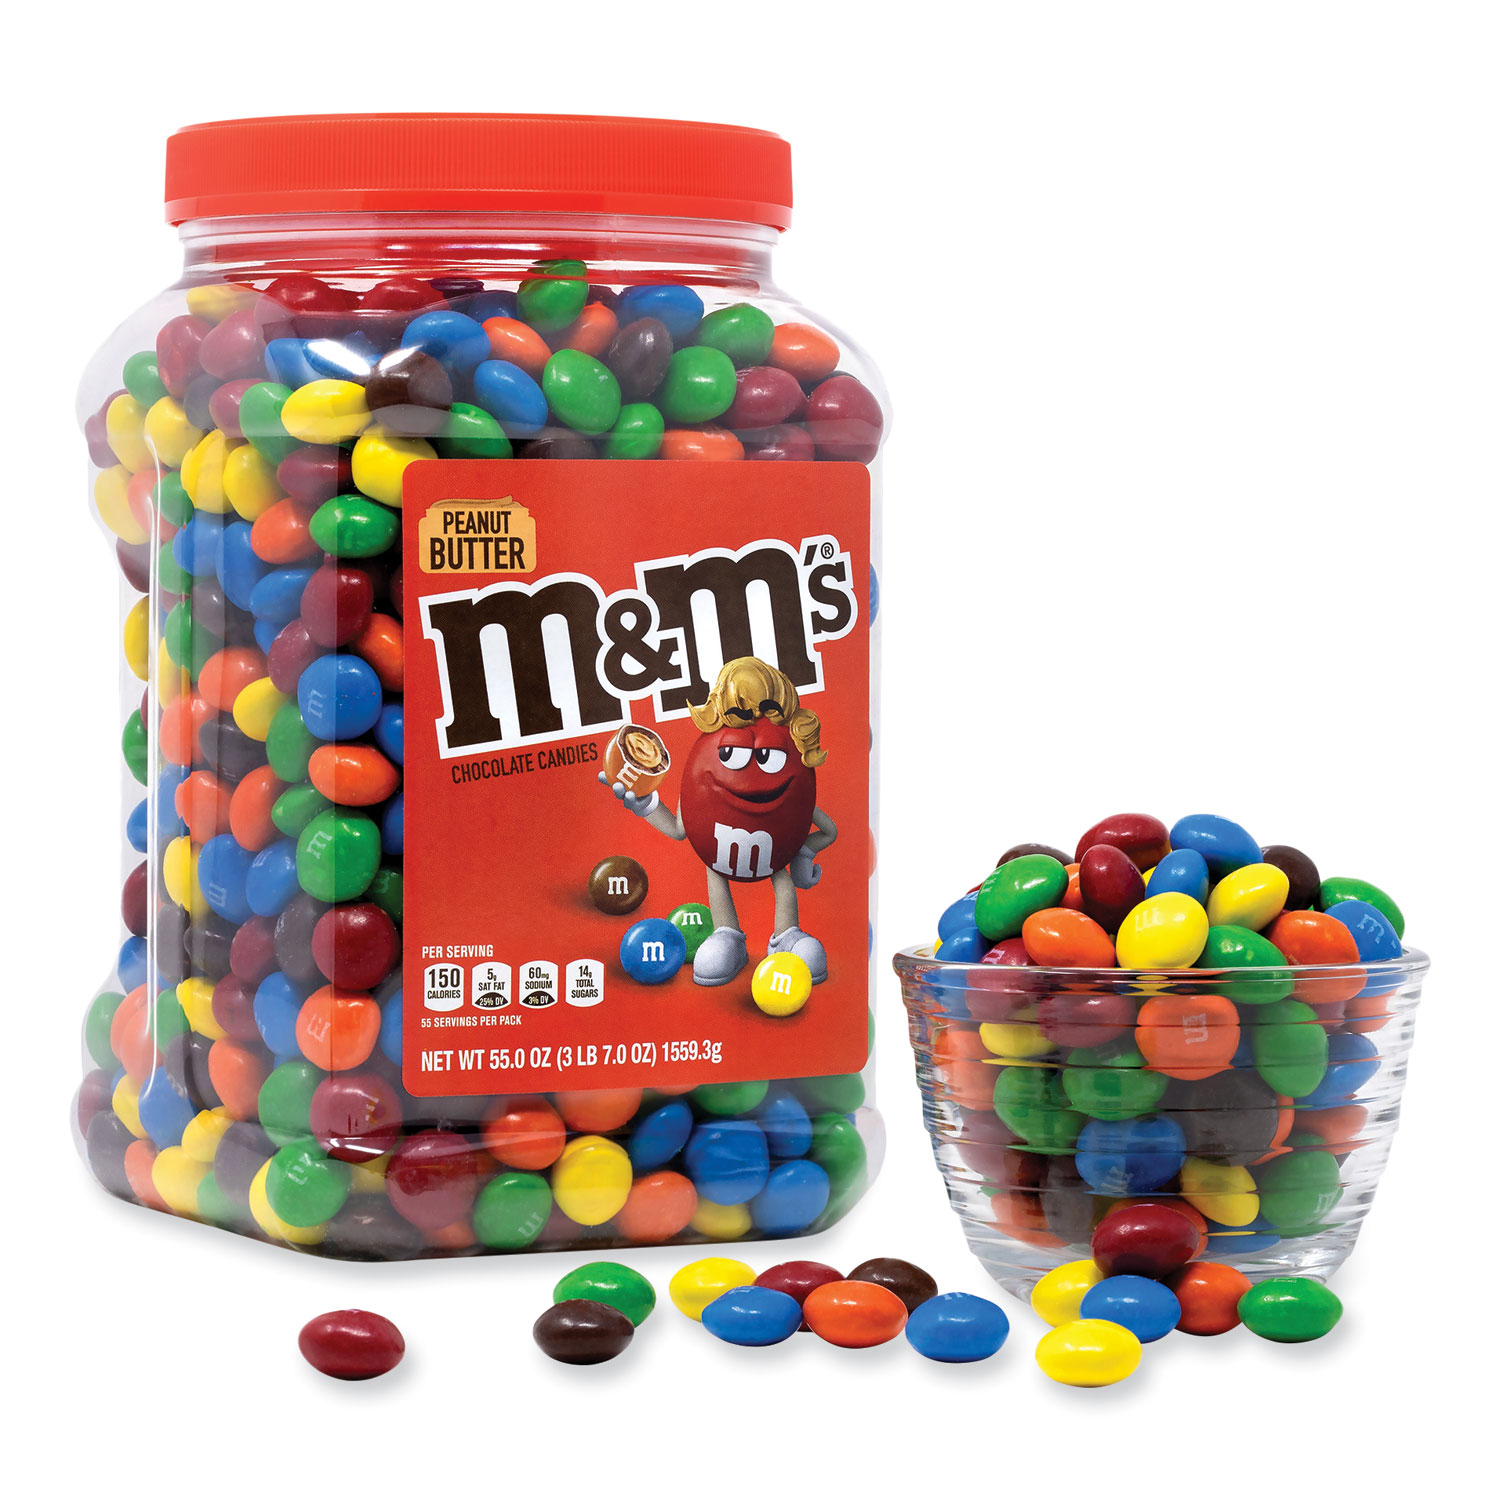 M&Ms Peanut Butter Family Size - 18.4oz - Pack of 2